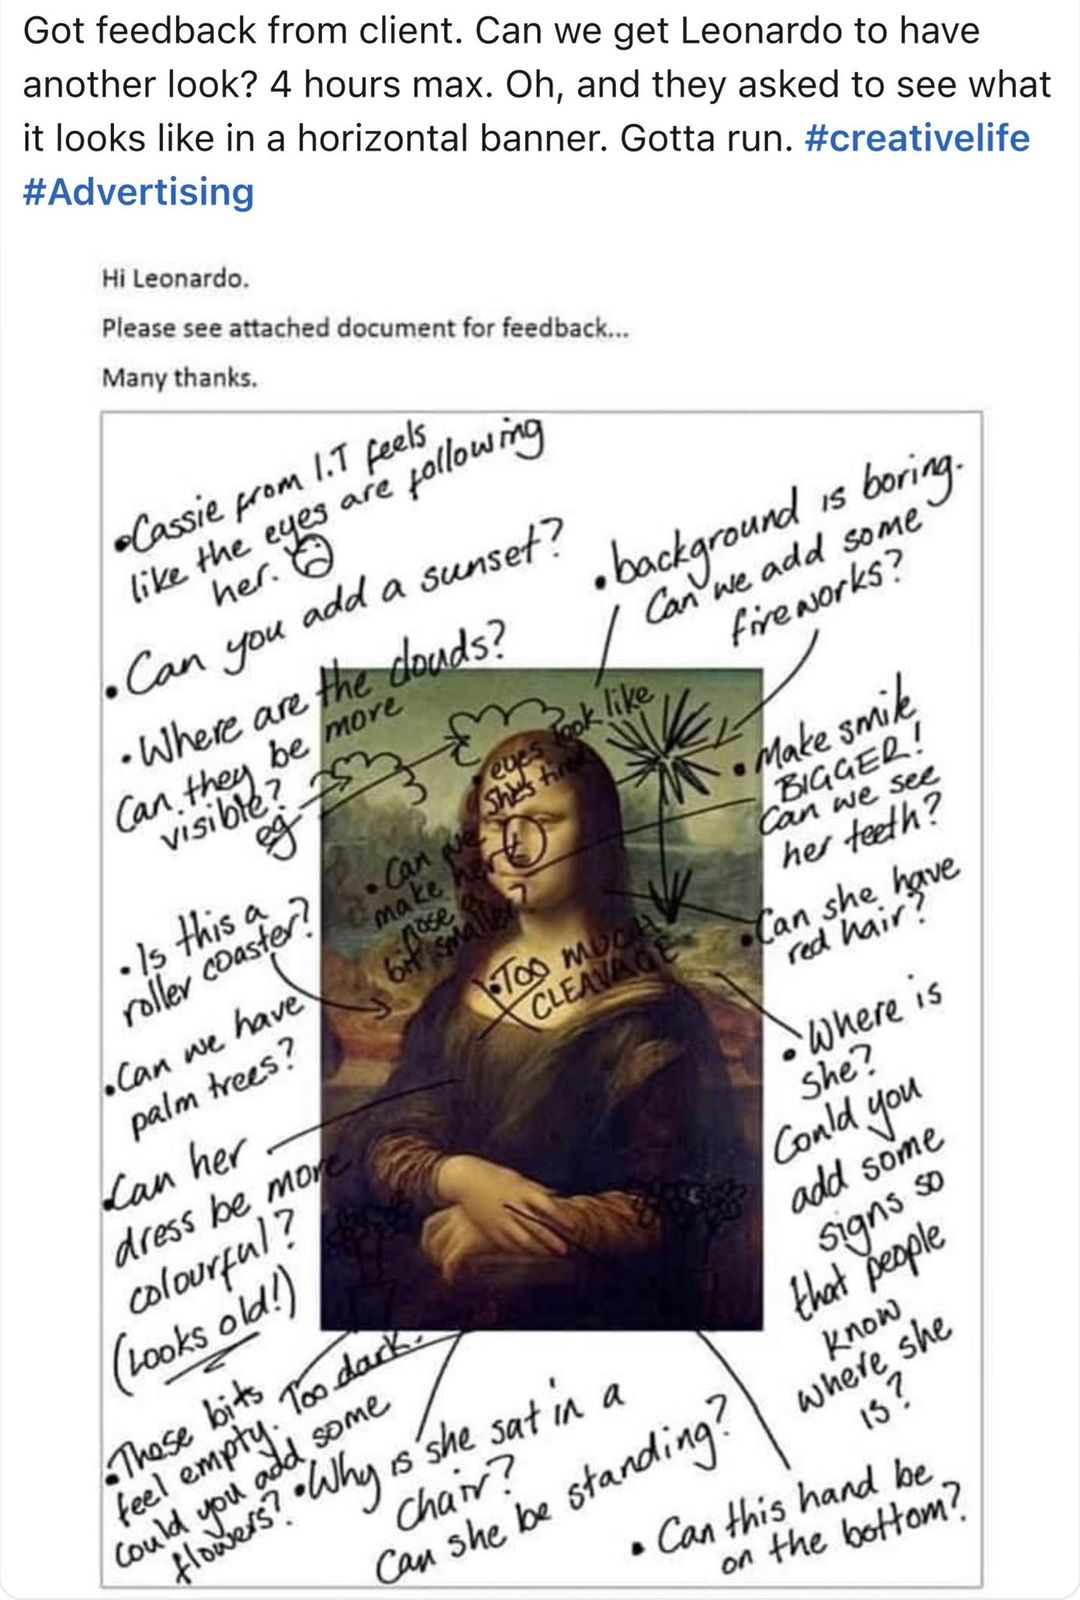 Mona Lisa with criticisms all over it.